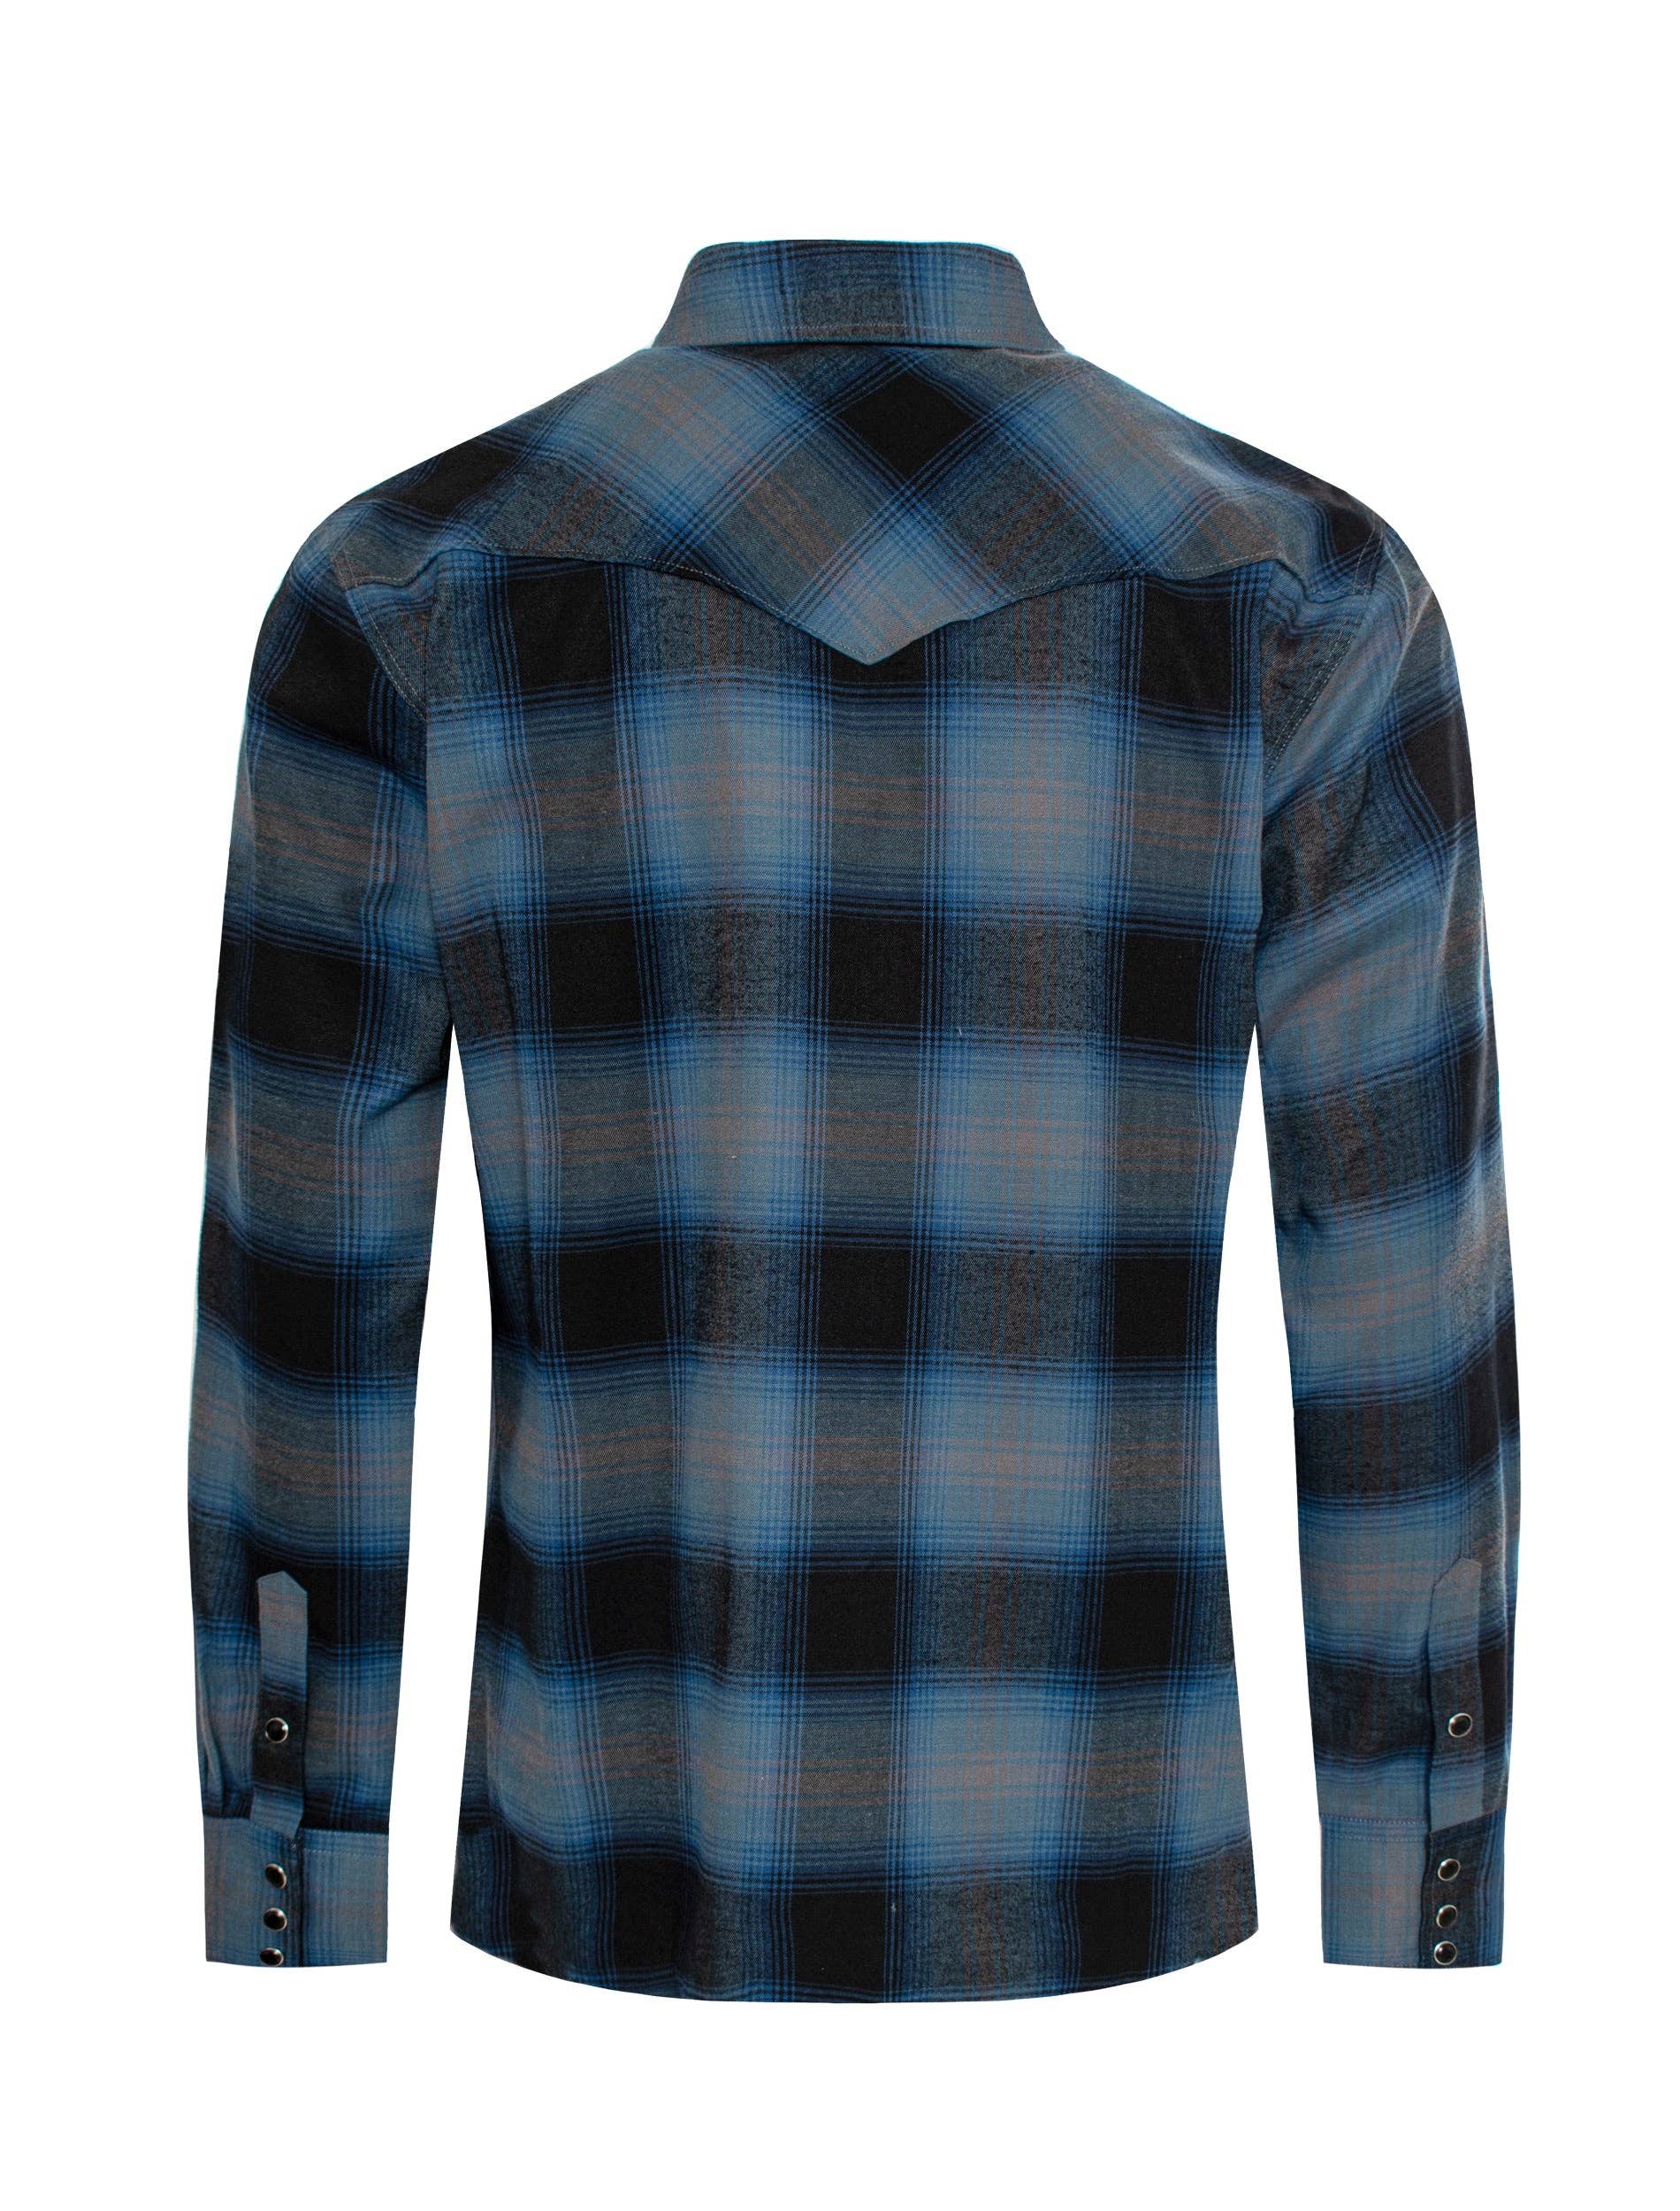 Rodeo Clothing - Men's Western Long Sleeve Flannel Shirts With Snap Buttons